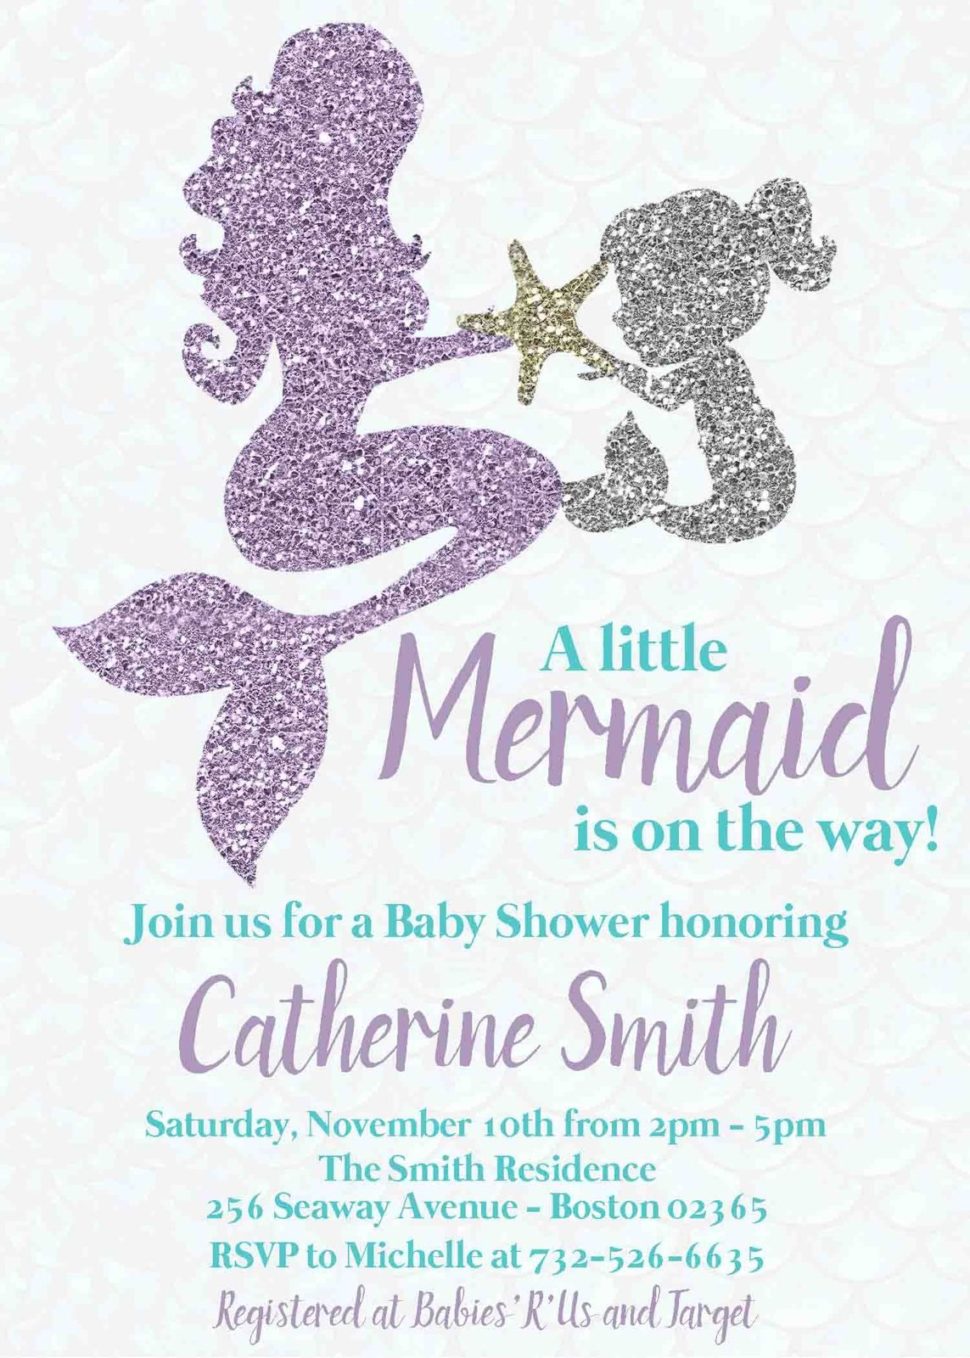 Medium Size of Baby Shower:nautical Baby Shower Invitations For Boys Baby Girl Themes For Bedroom Baby Shower Ideas Baby Shower Decorations Themes For Baby Girl Nursery Elegant Baby Shower Nursery For Girls Baby Shower Ideas Baby Shower Invitations For Boys